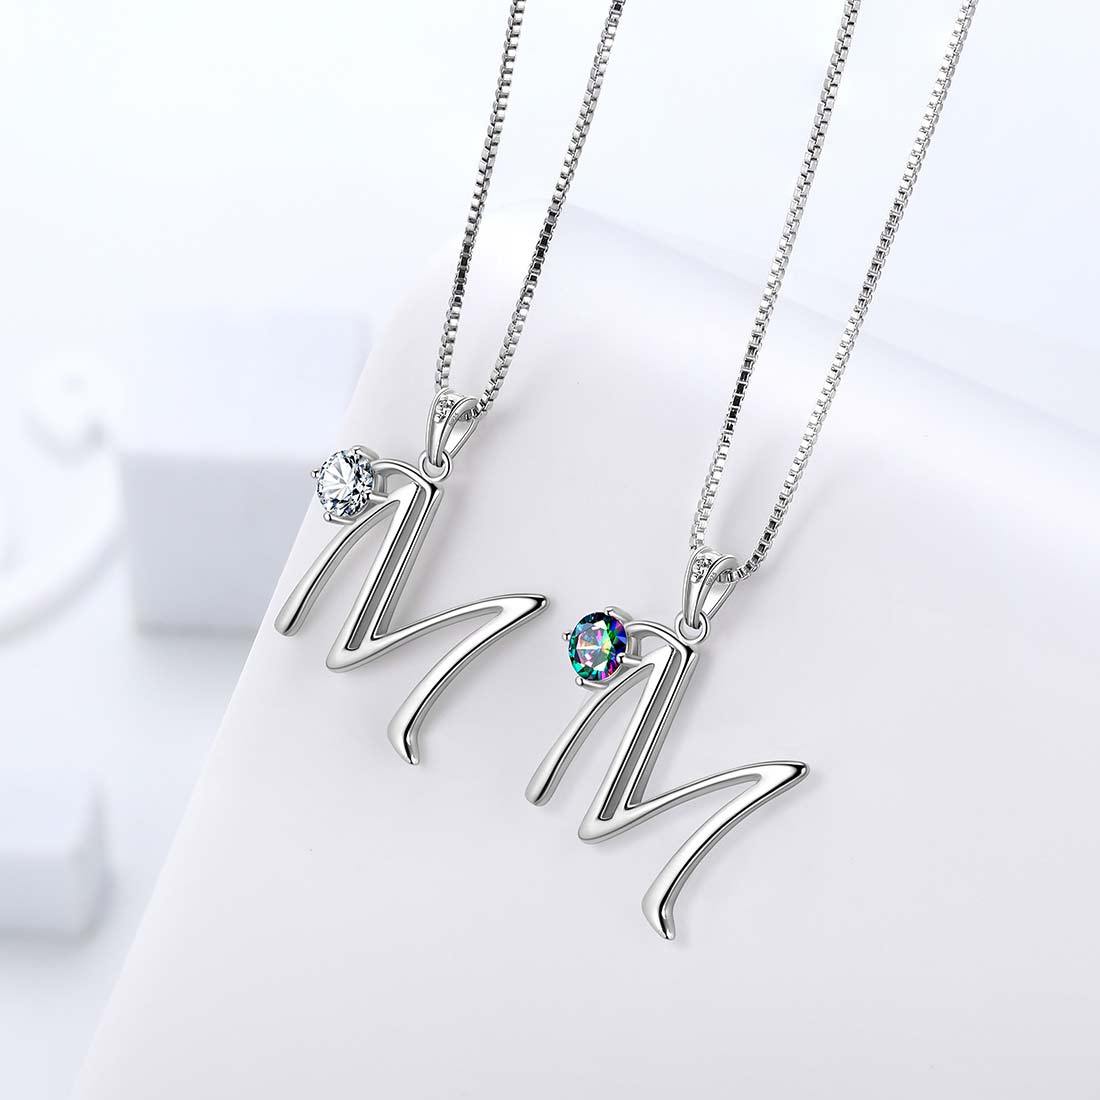 Women Letter M Initial Necklaces Sterling Silver Aurora Tears Jewelry